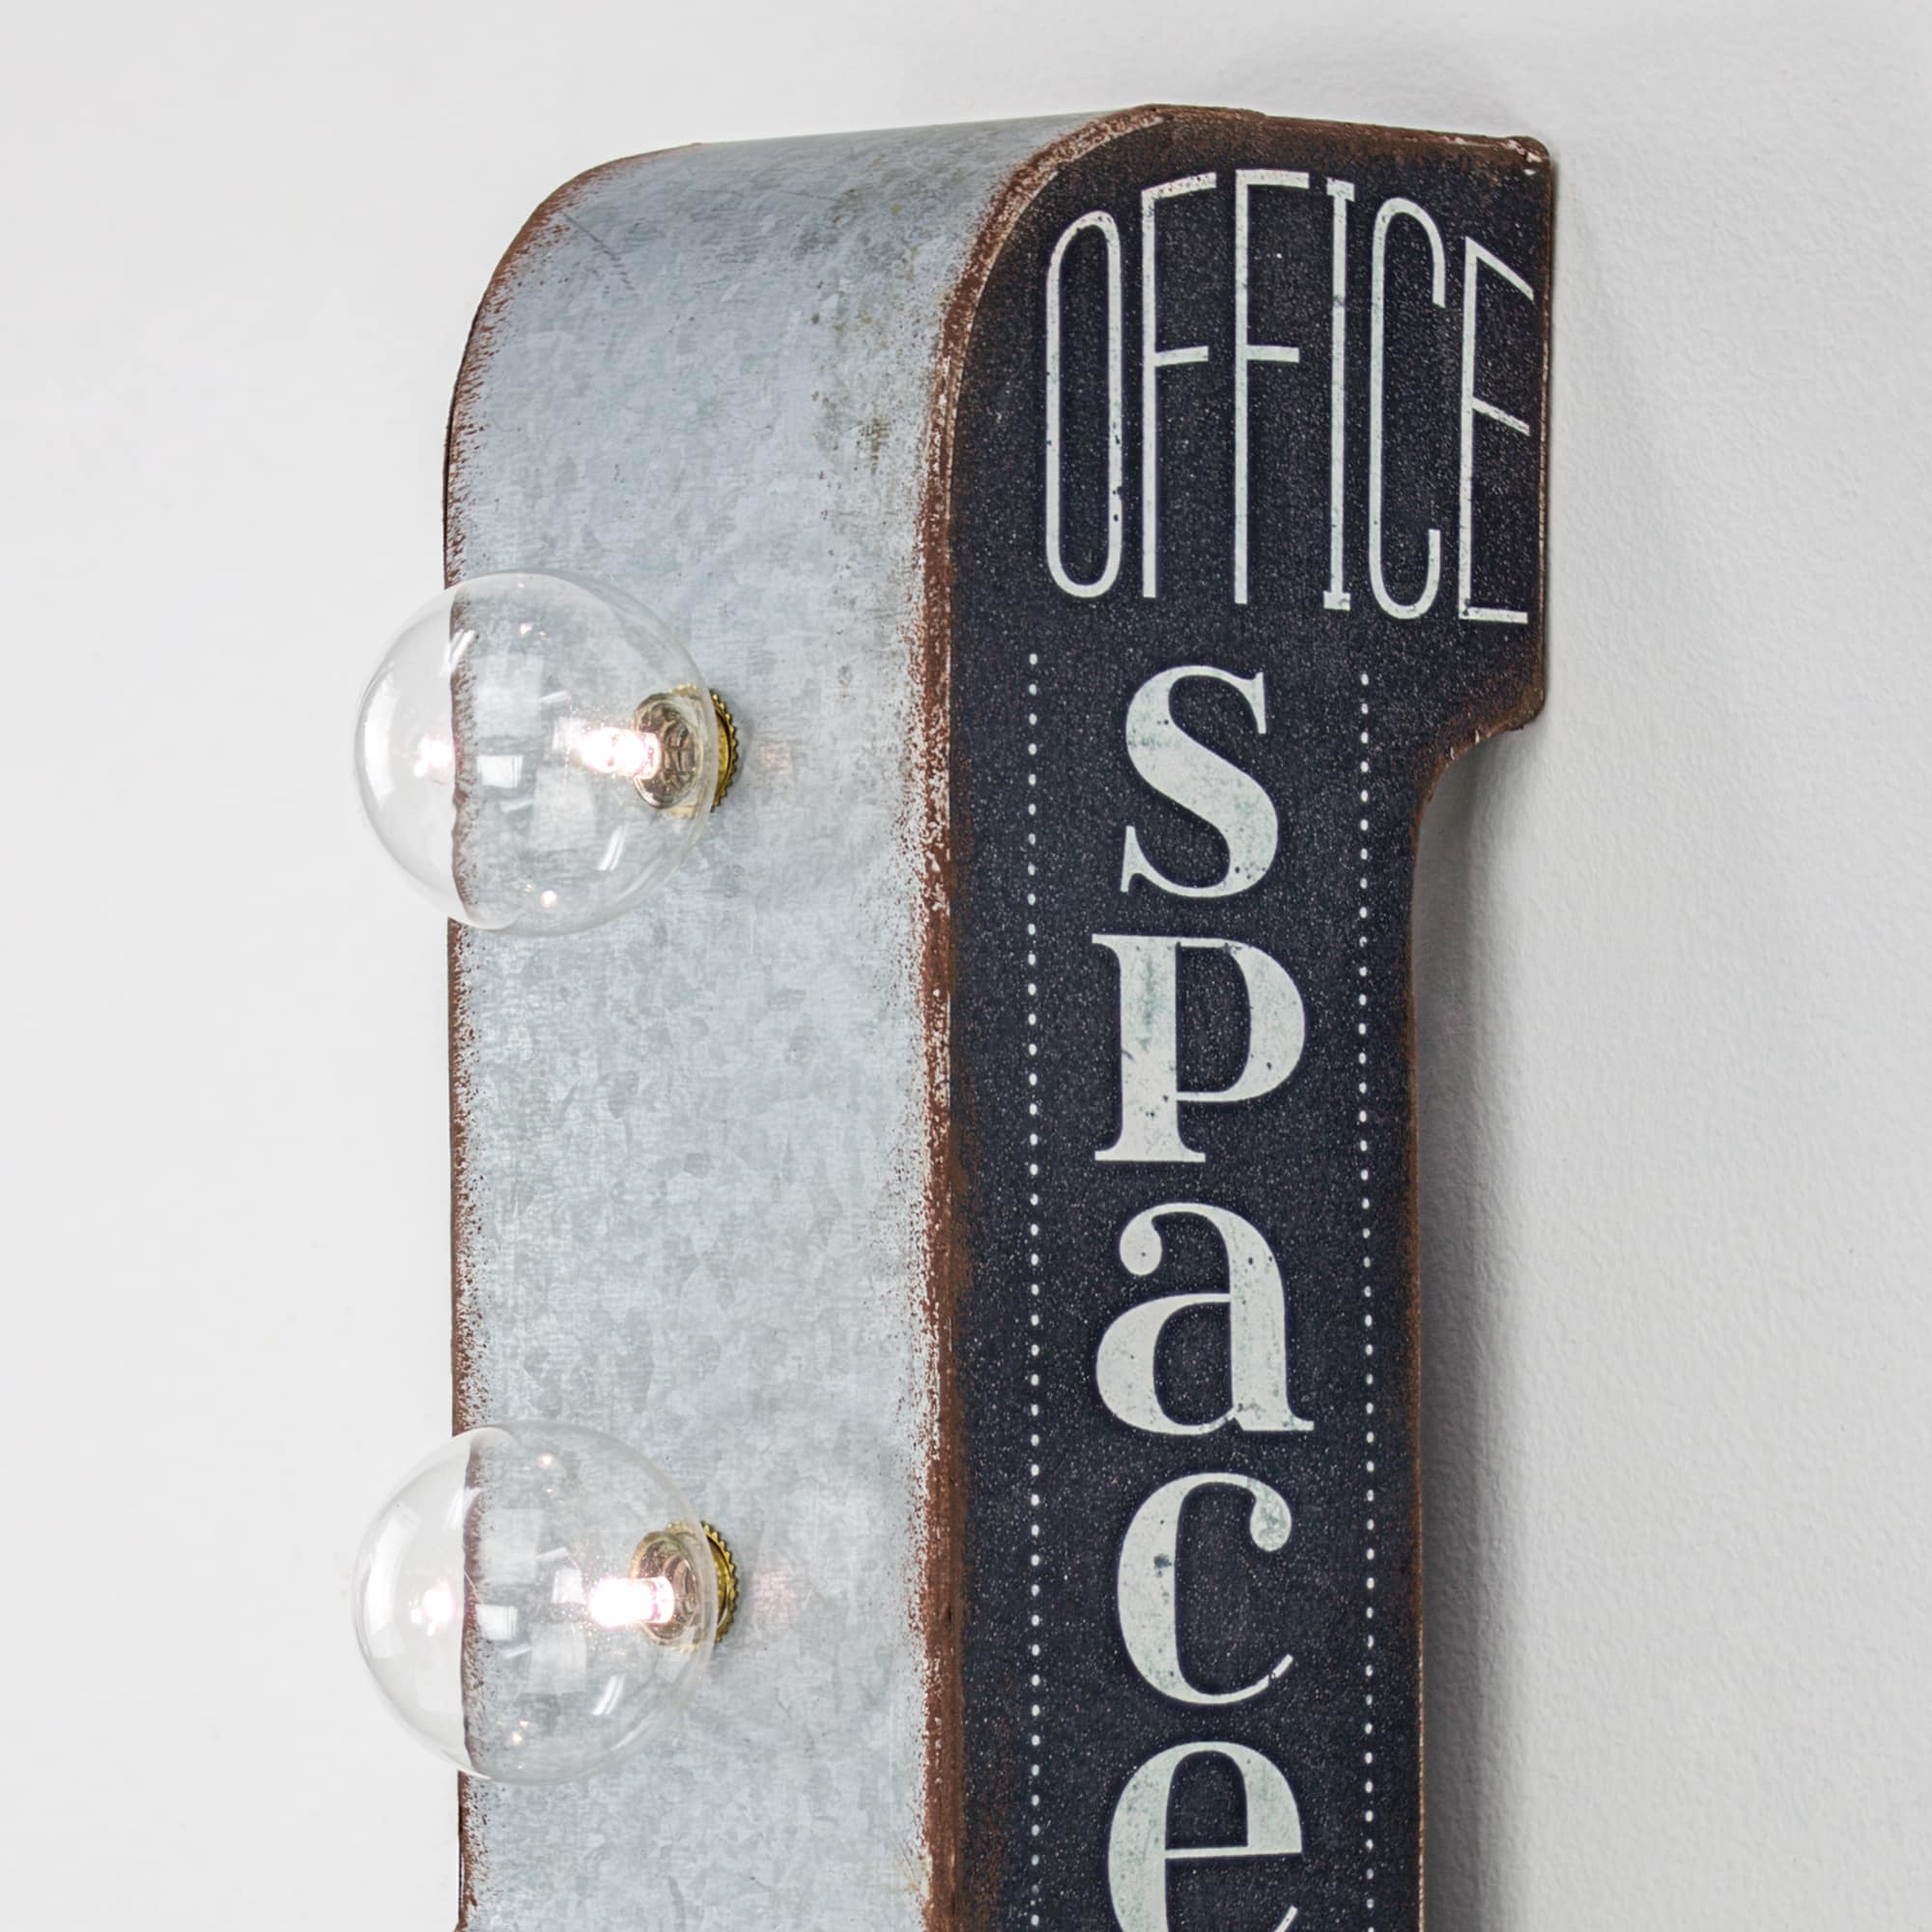 Office Space Vintage Mini Metal LED Marquee Wall Sign